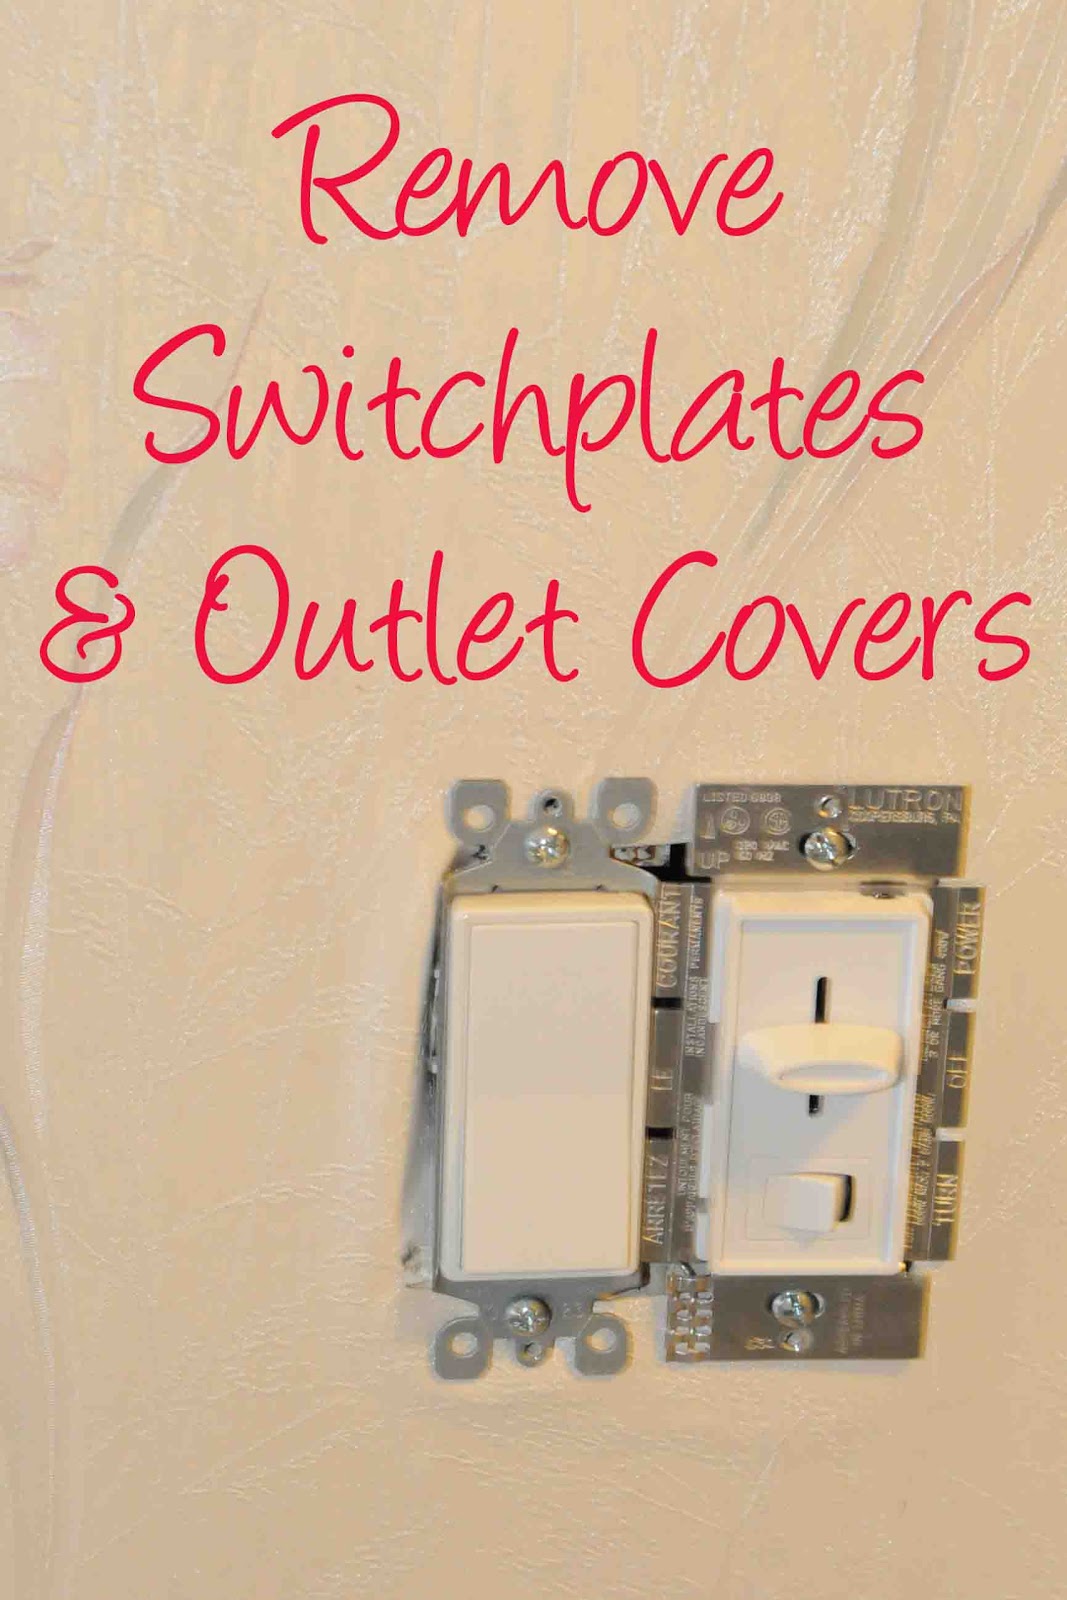 Step 1: Remove all outlet covers and switch-plates. Take down all ...